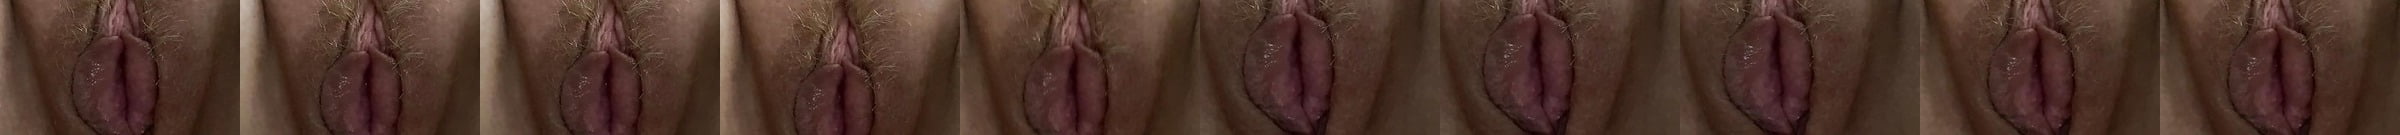 Featured Very Old Pussy Close Up Porn Videos Xhamster